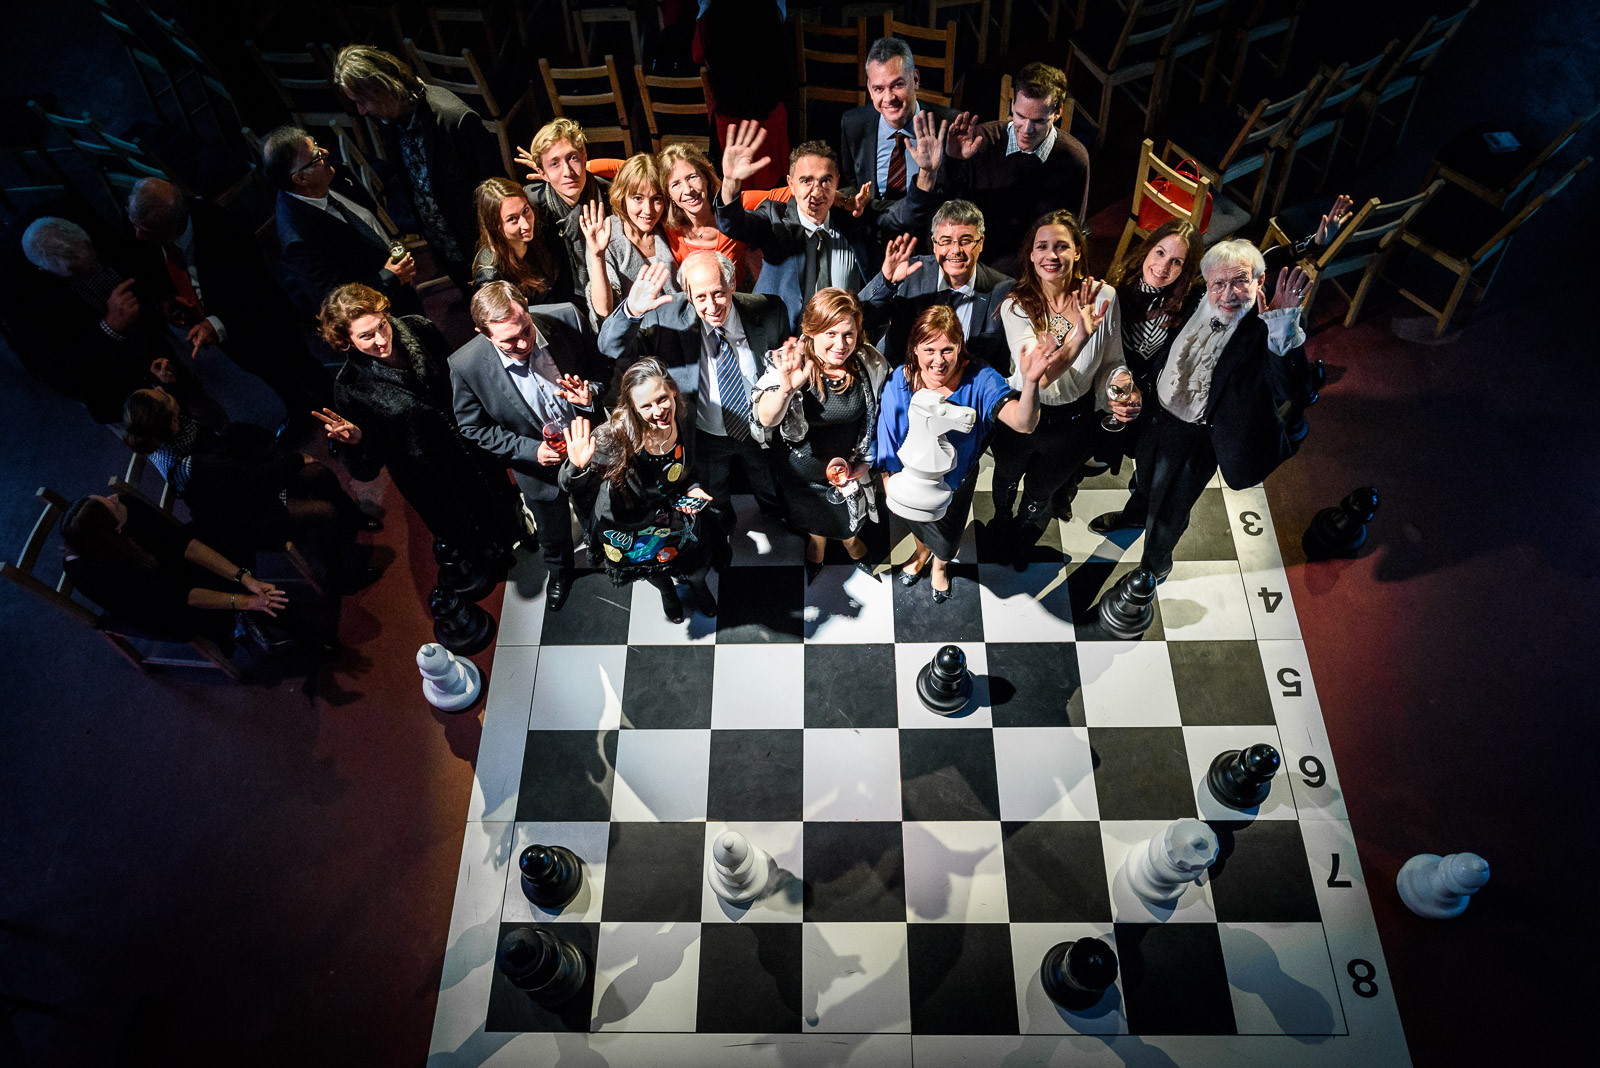 Group photo on large chess board